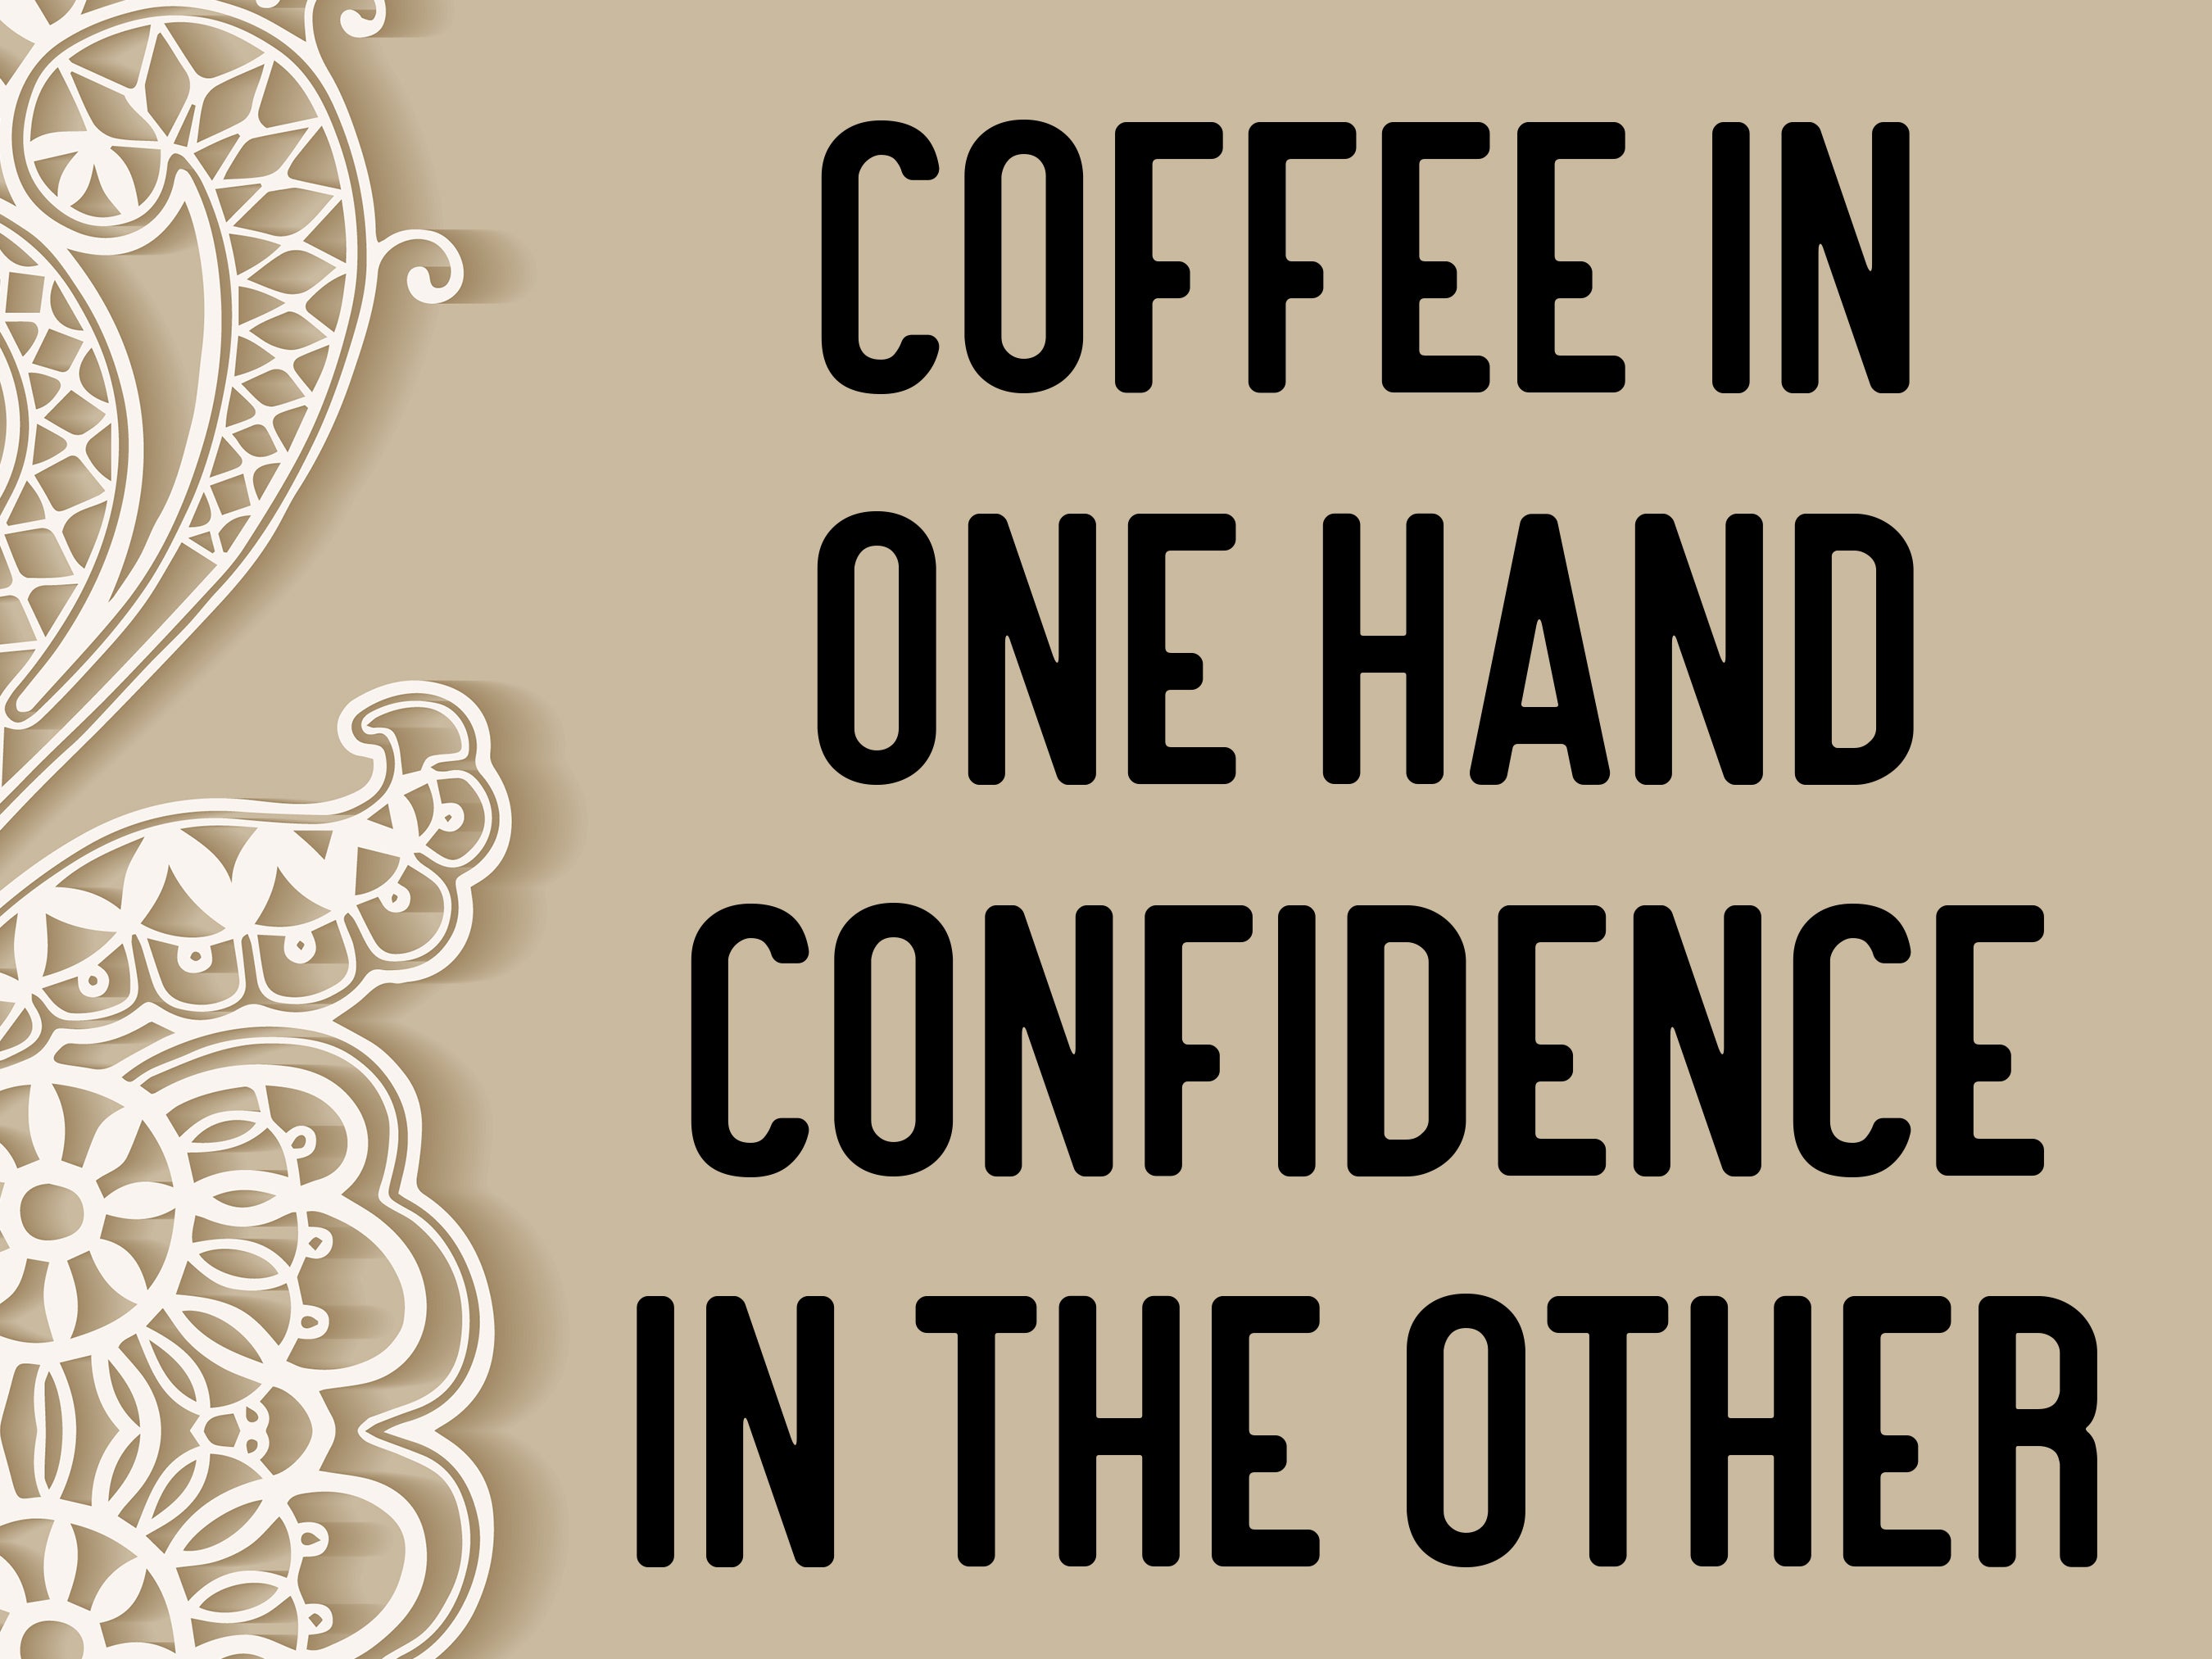 Coffee in One Hand Confidence in the other, Mug clay stamp for handbuild pottery Mug Stamp - A Mayes Pottery